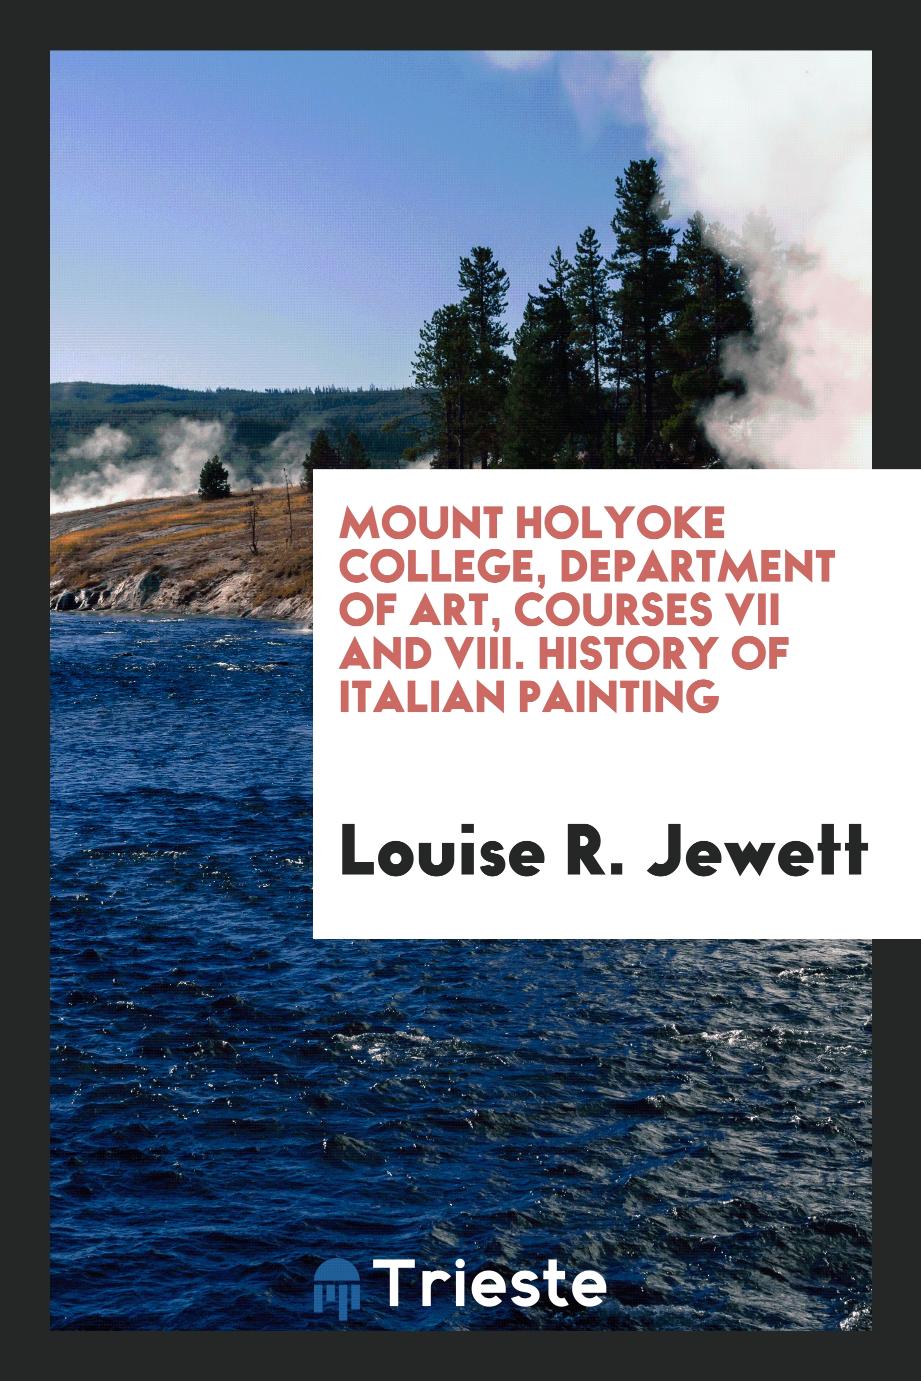 Mount Holyoke College, Department of Art, Courses VII and VIII. History of Italian Painting